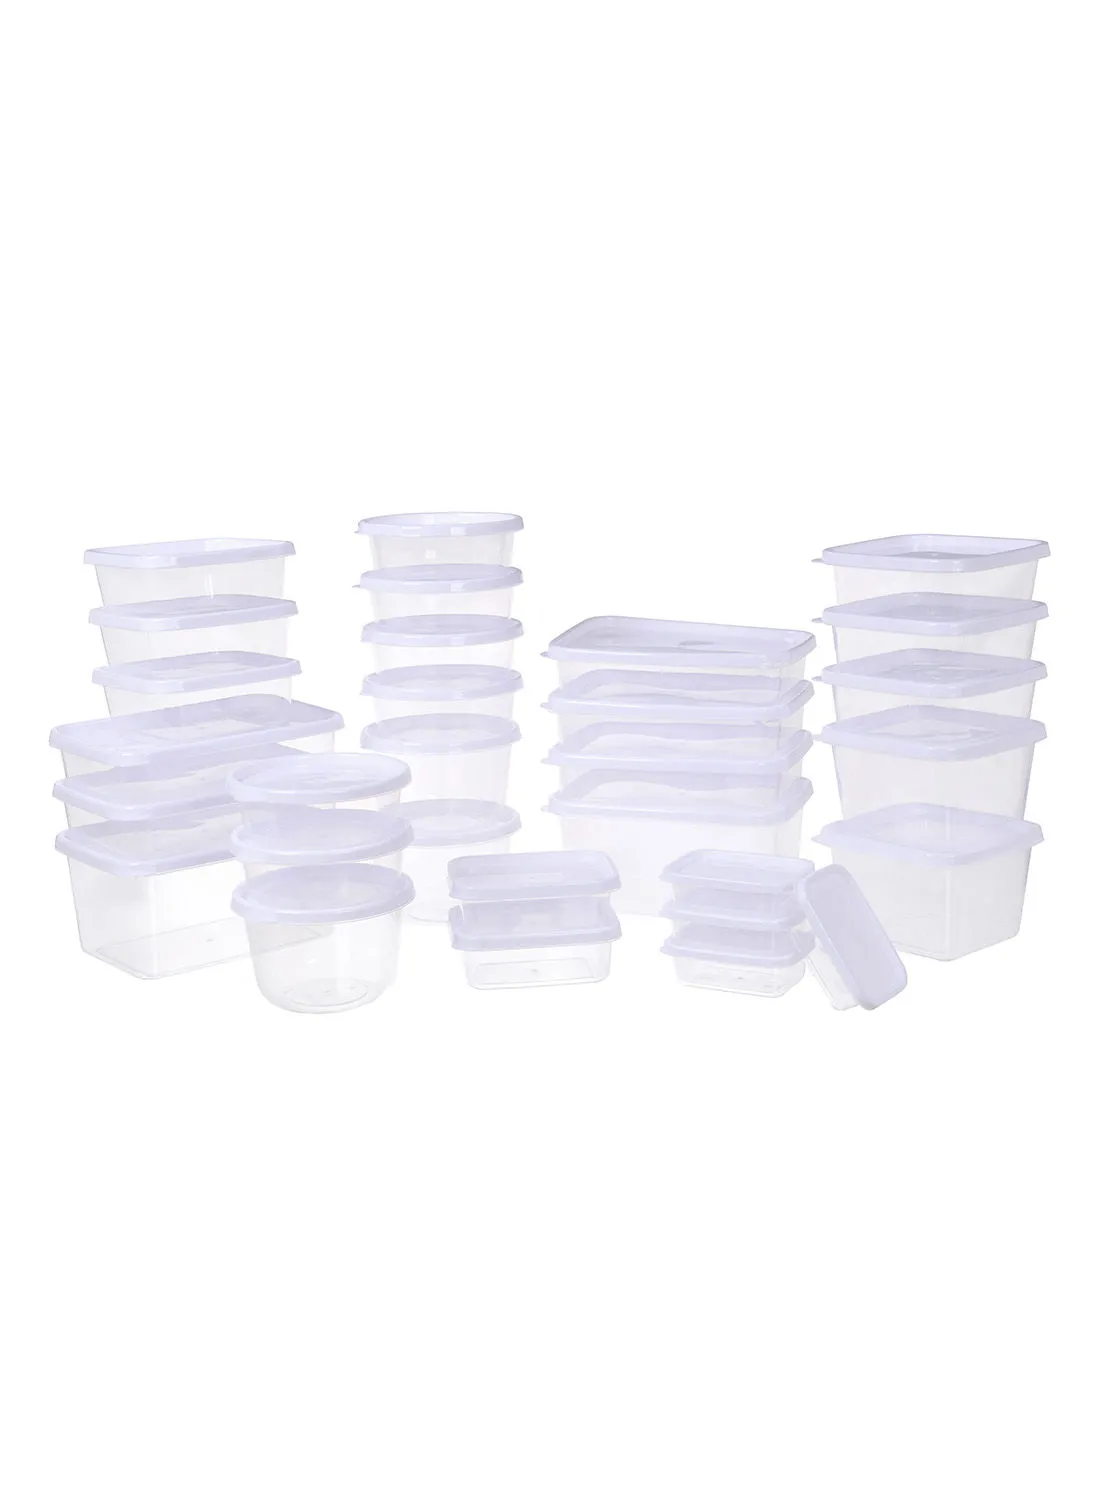 Amal 30 Piece Plastic Food Container Set - Spill Proof Lids - Food Storage Box - Storage Boxes - Kitchen Cabinet Organizers - White